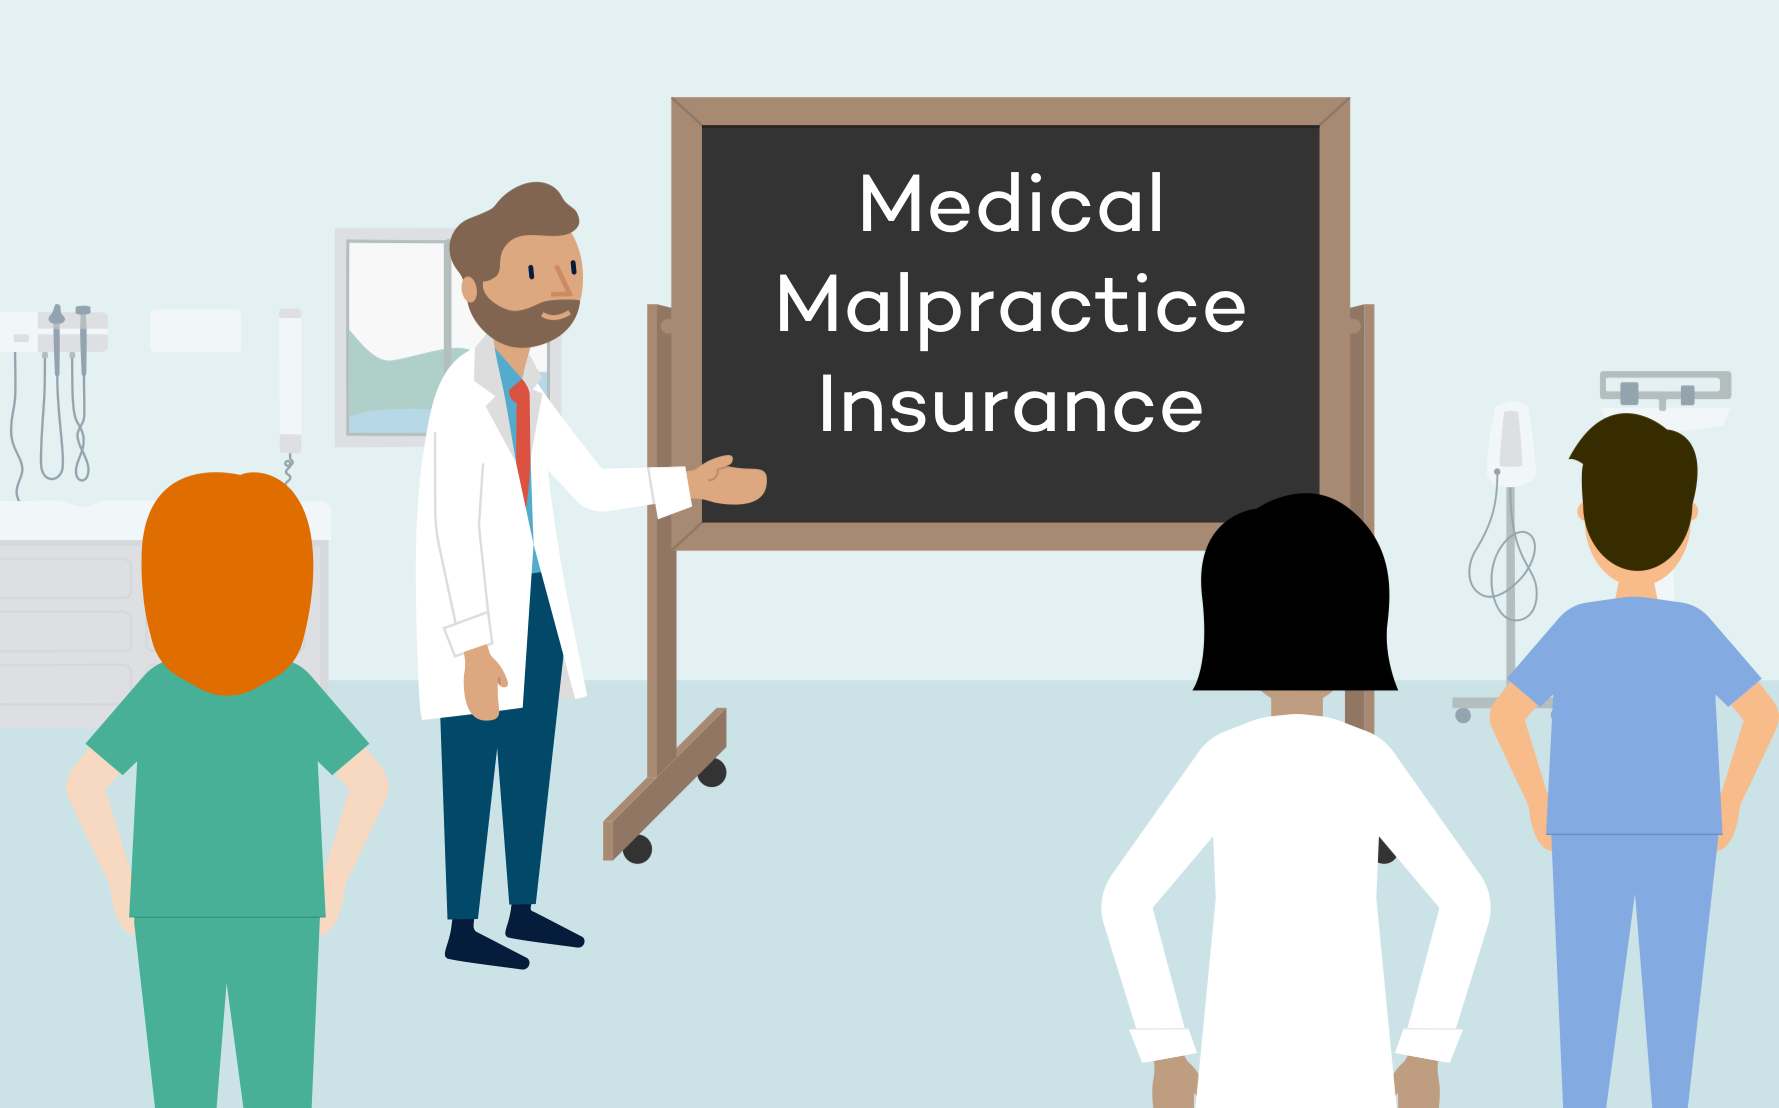 Medical Malpractice Insurance Market to See Huge Growth by 2'